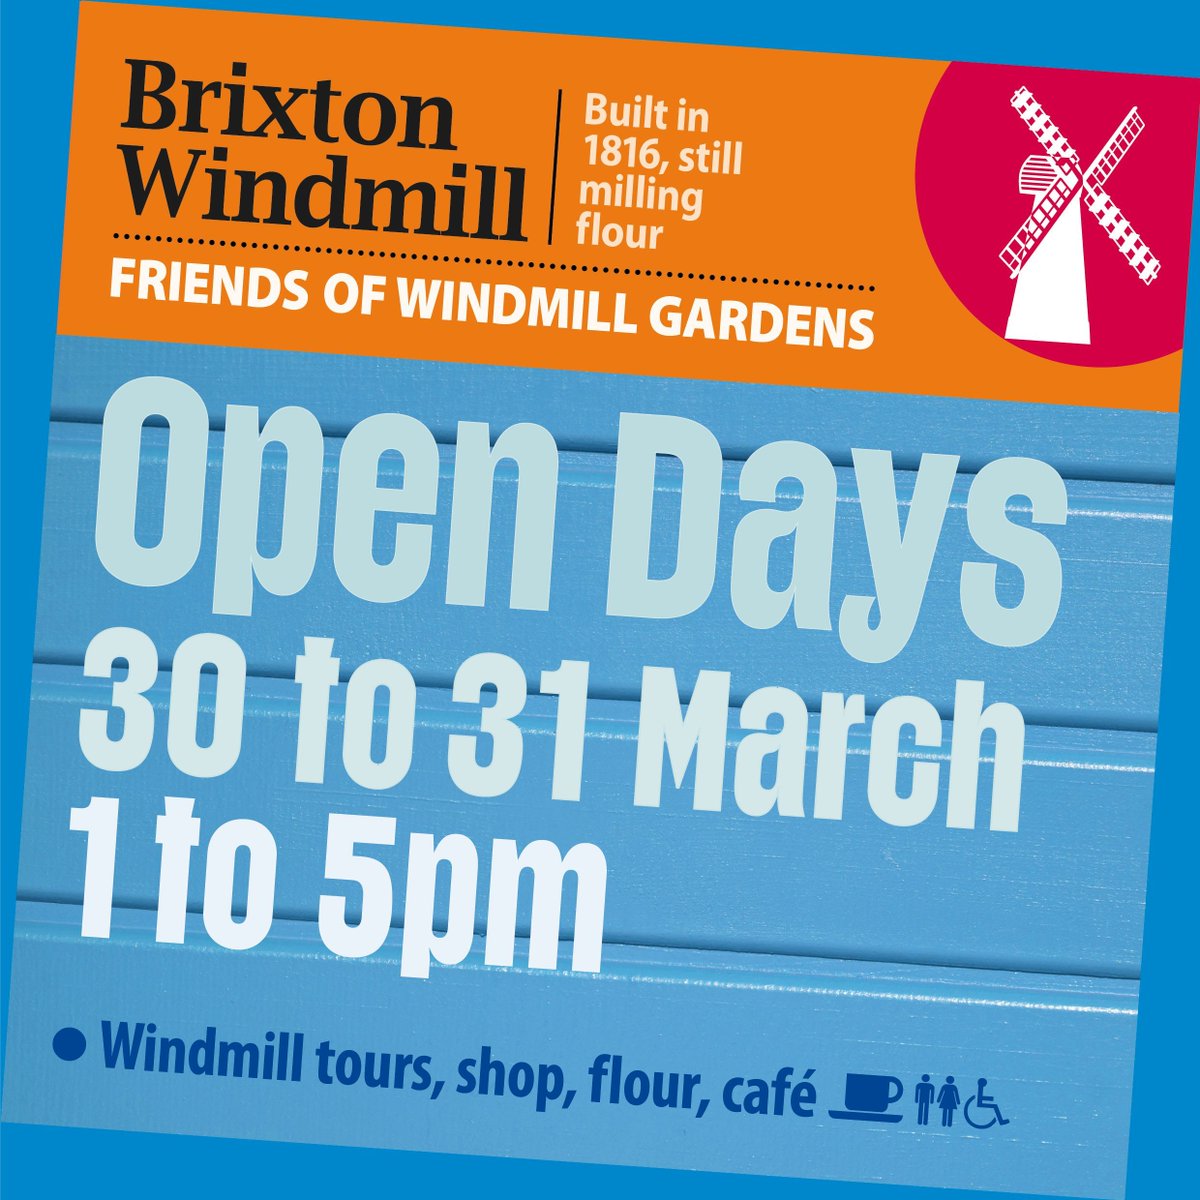 Our first Open Weekend of 2024 is the Easter Weekend, 30 & 31 March. We can't wait to welcome visitors back on our guided windmill tours and local history walk. buff.ly/49Q9Hc8